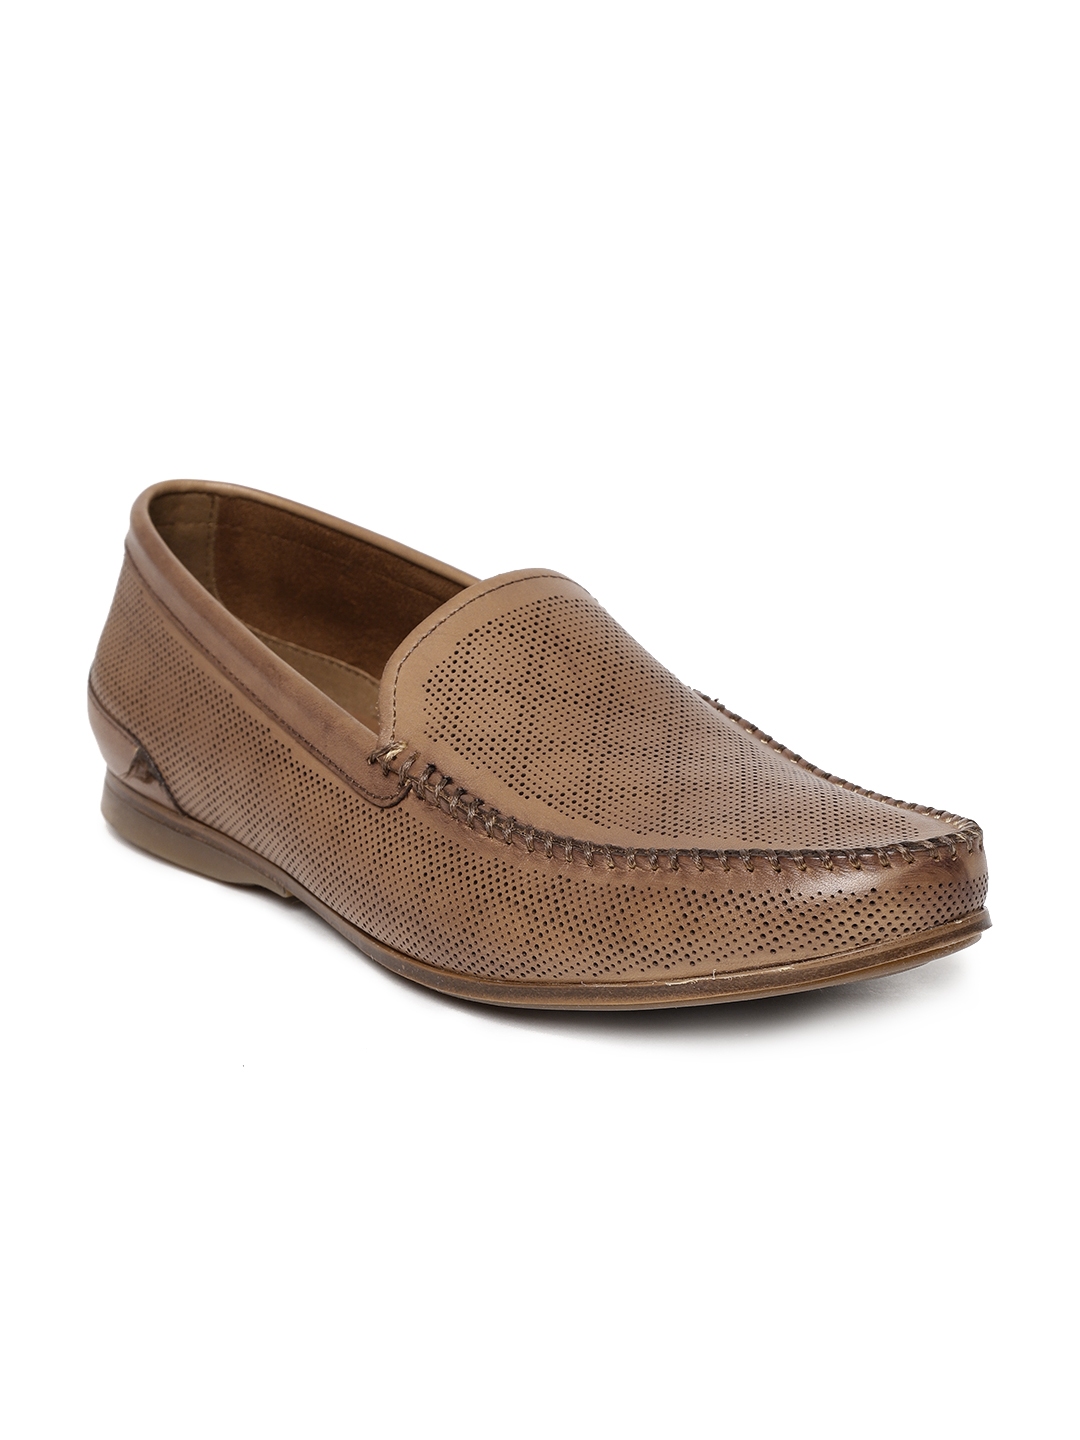 aldo mens leather loafers